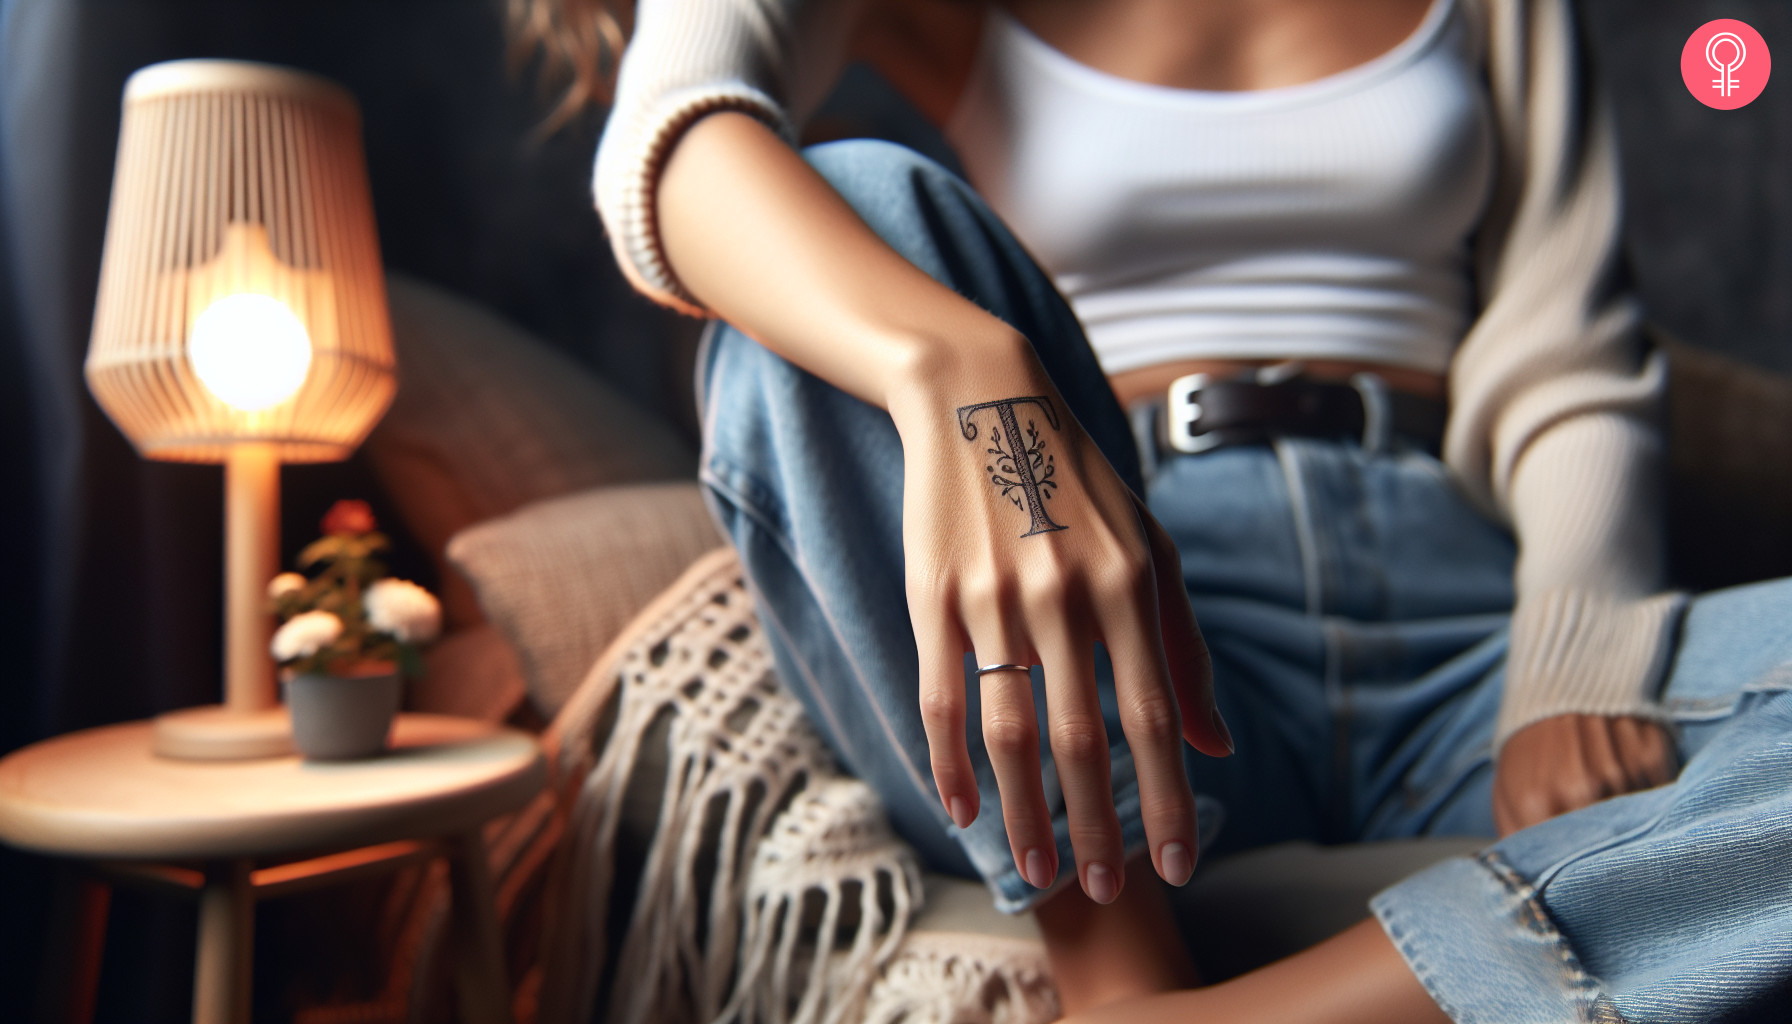 A T letter tattoo design on a woman’s hand